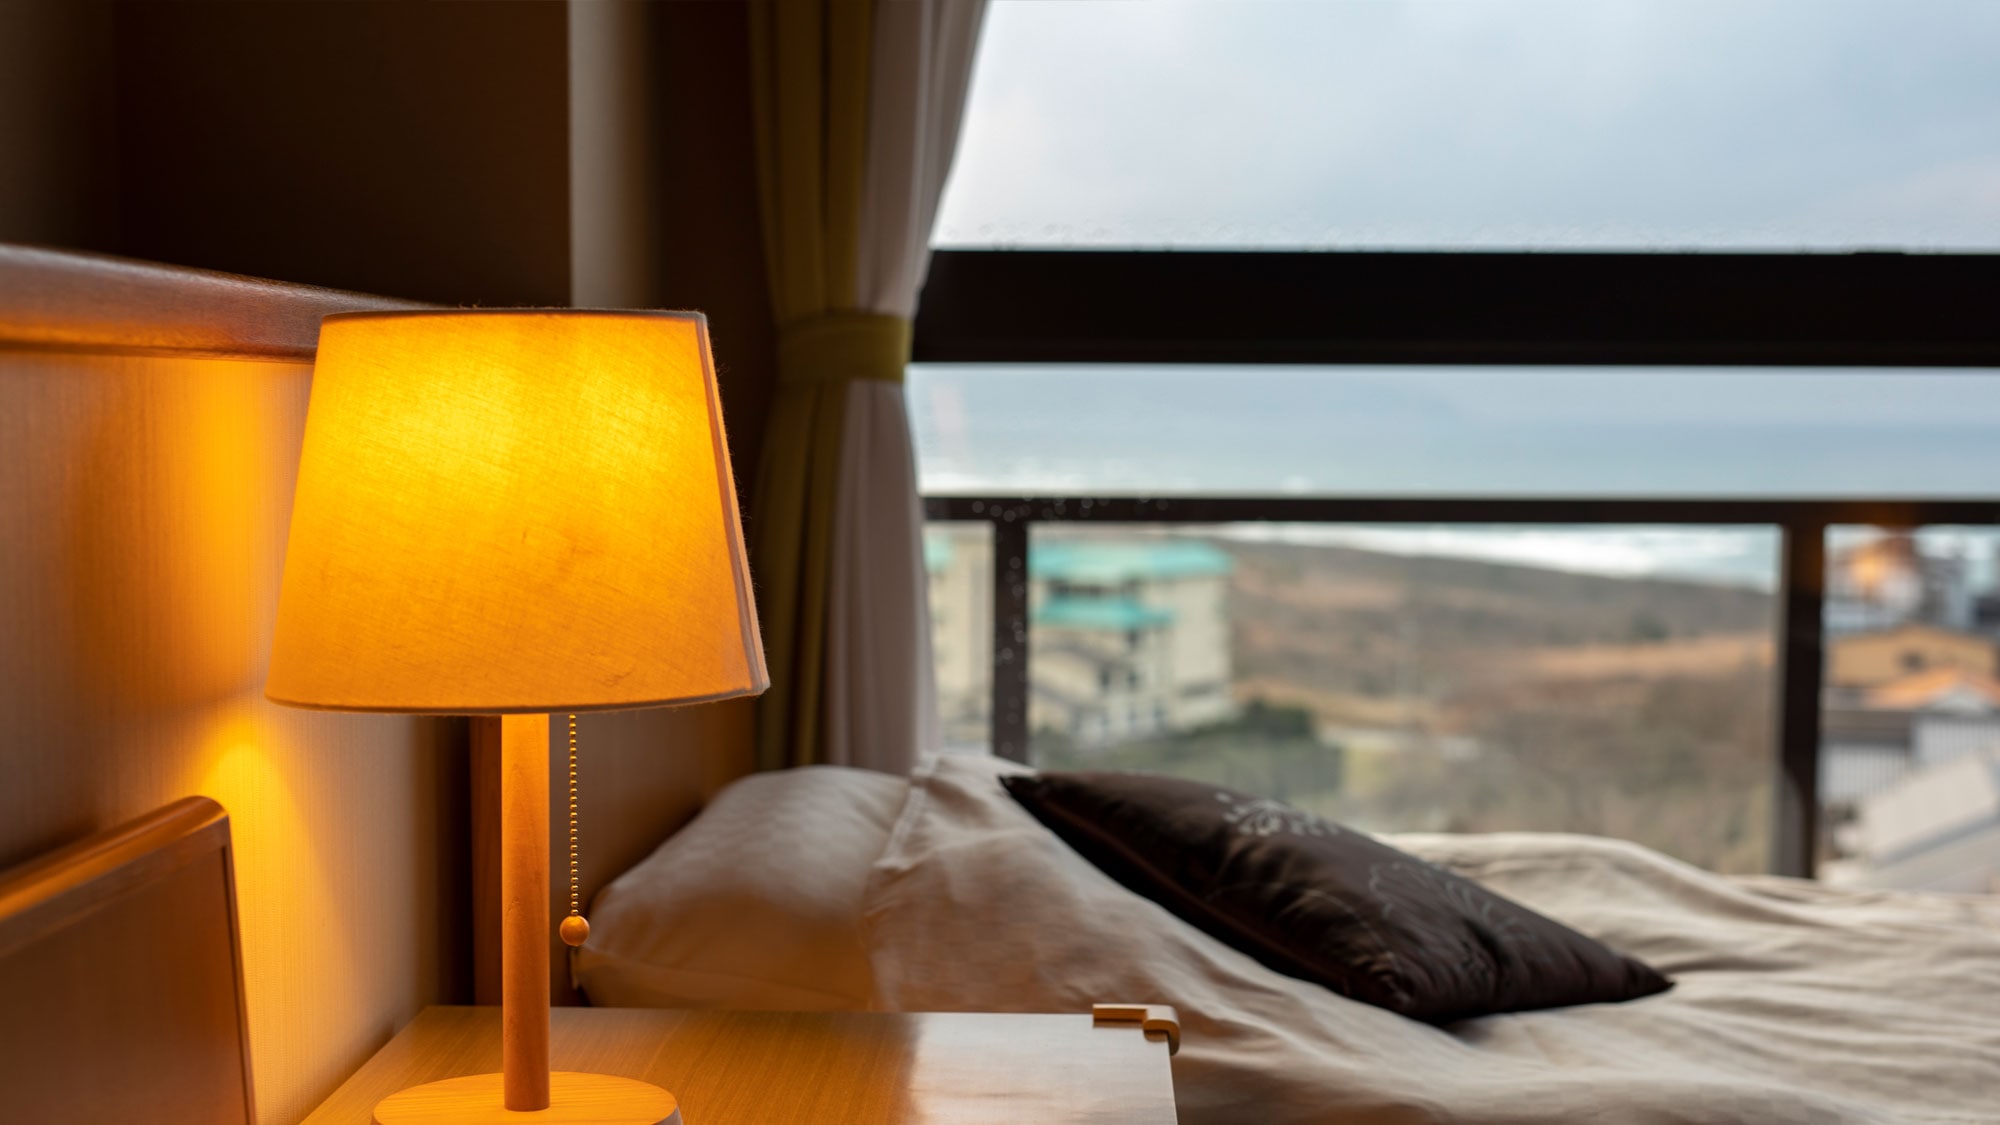 A faint lamp and a setting sun. All rooms at Kasyouen have a panoramic view of the sea.